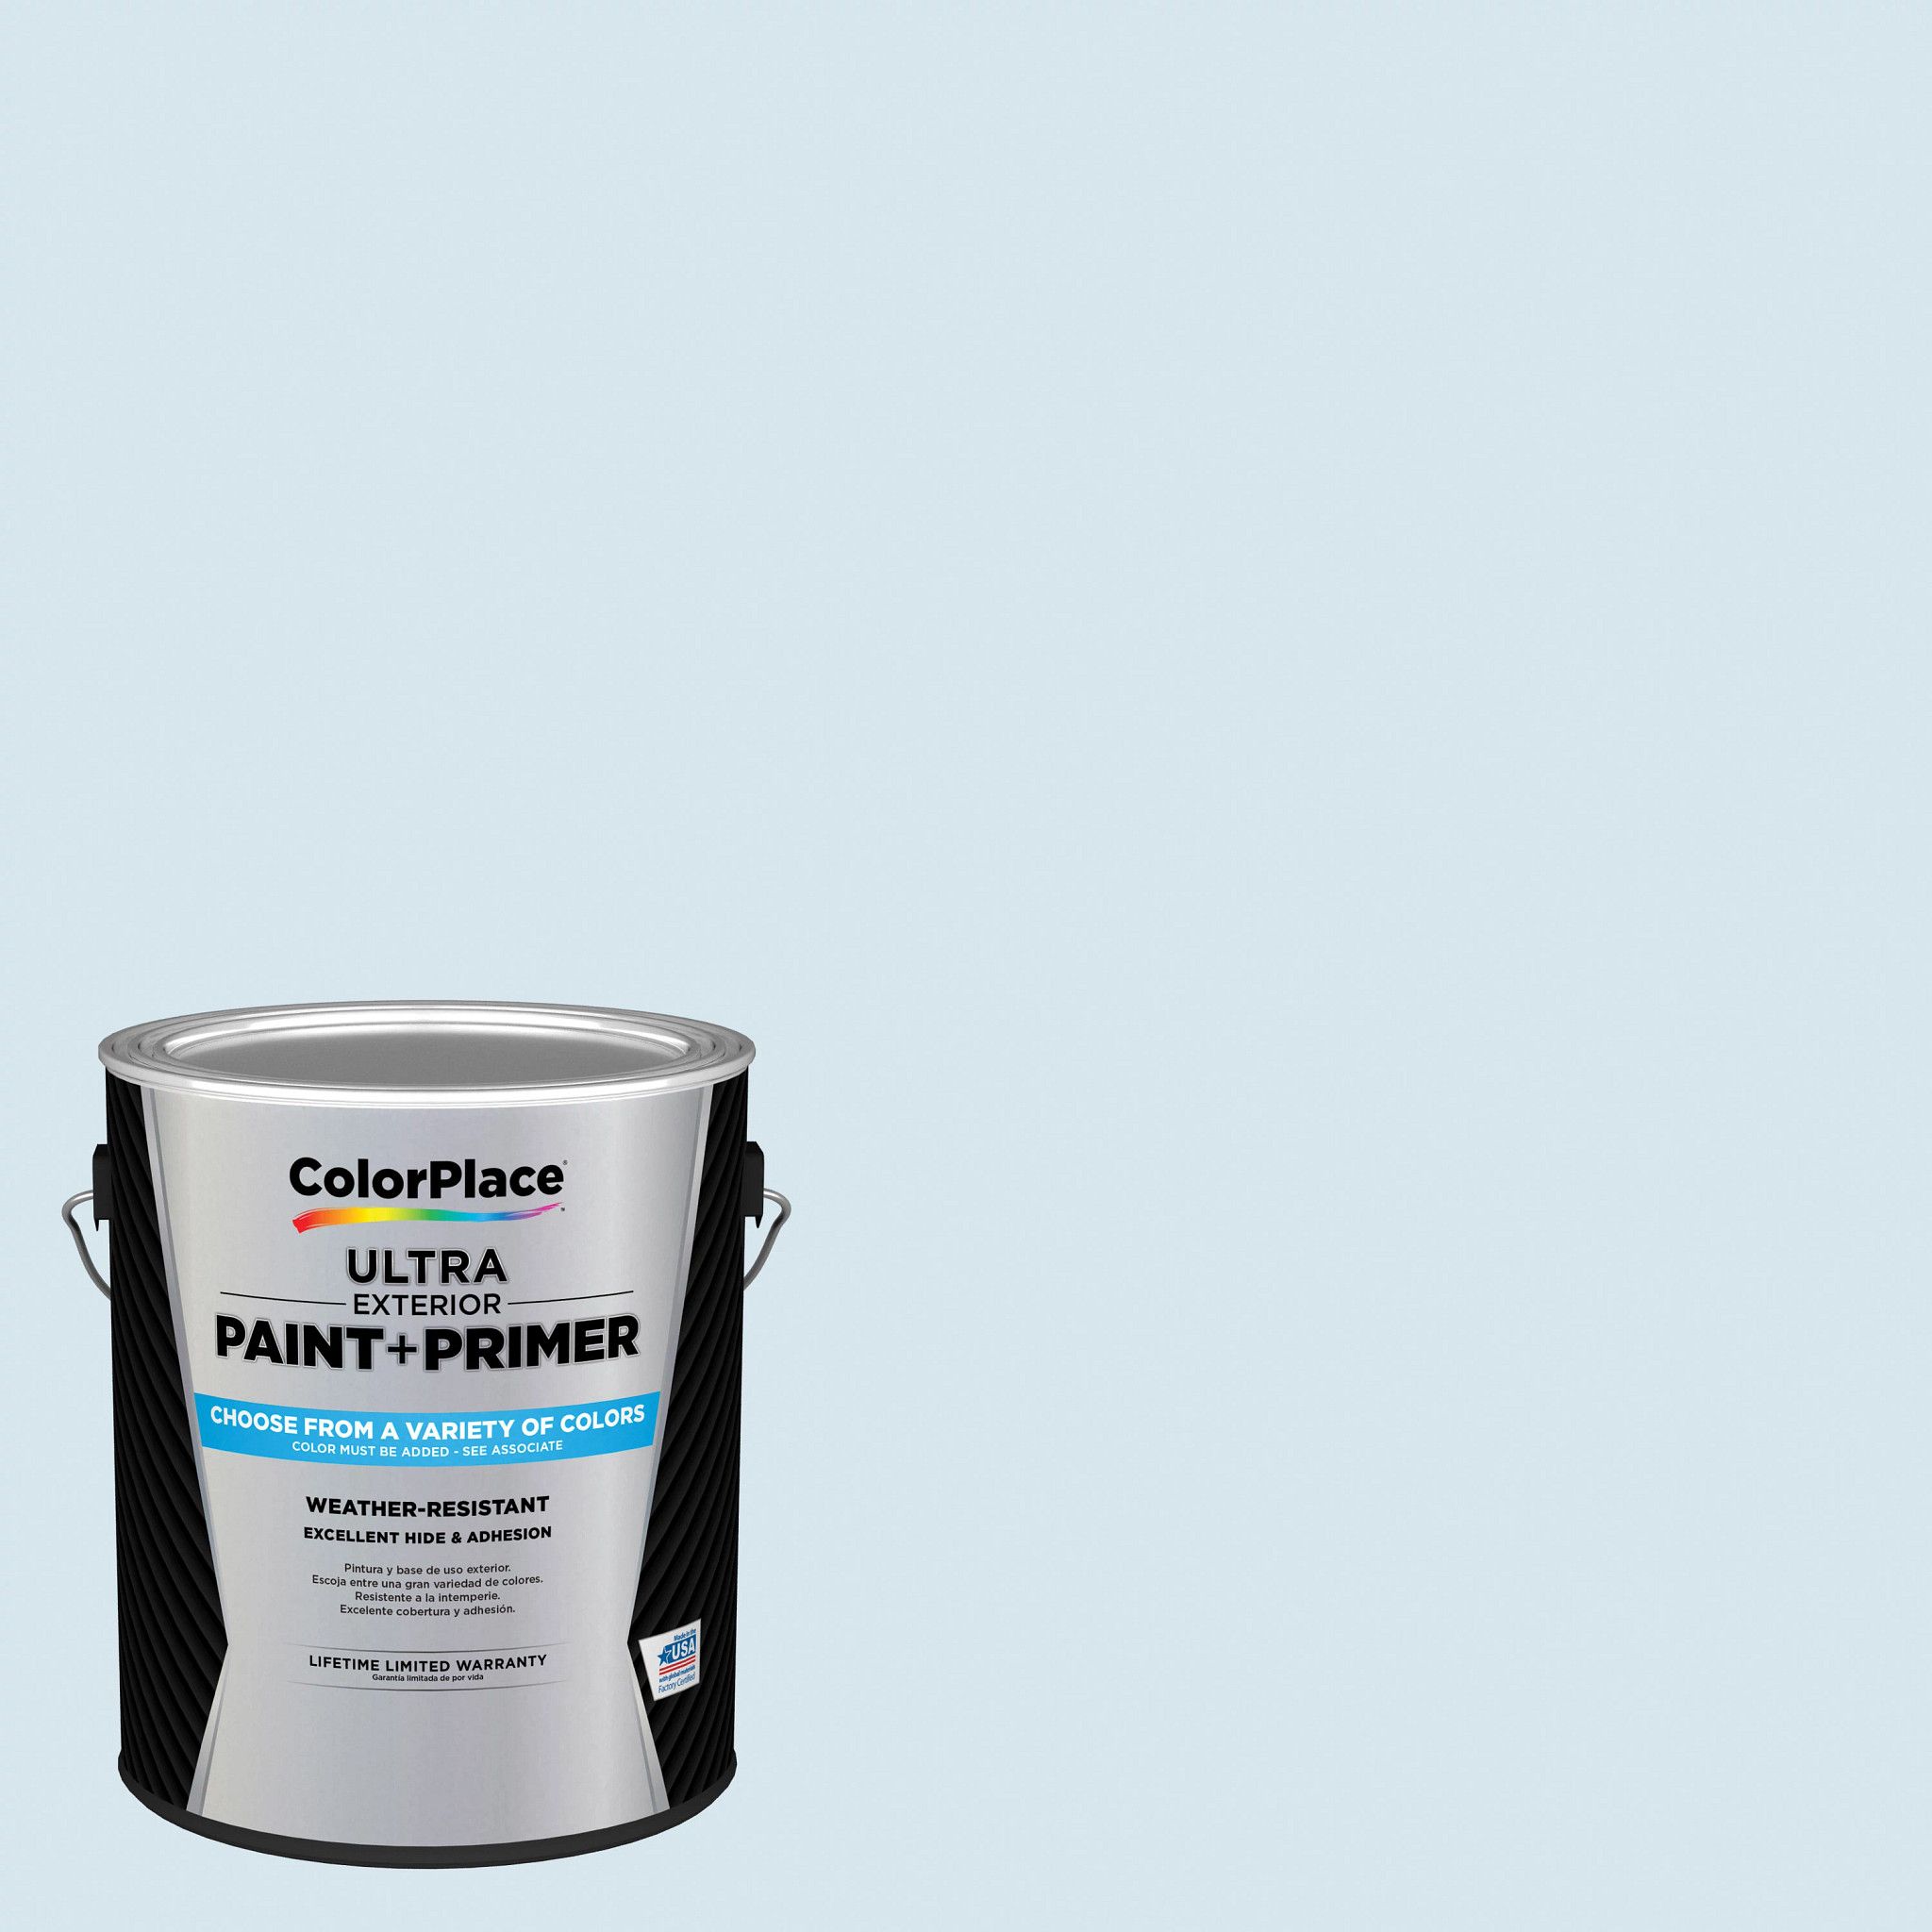 ColorPlace Ultra Exterior Paint & Primer, Blue Ice Age, Flat, 1 Gallon - image 1 of 11